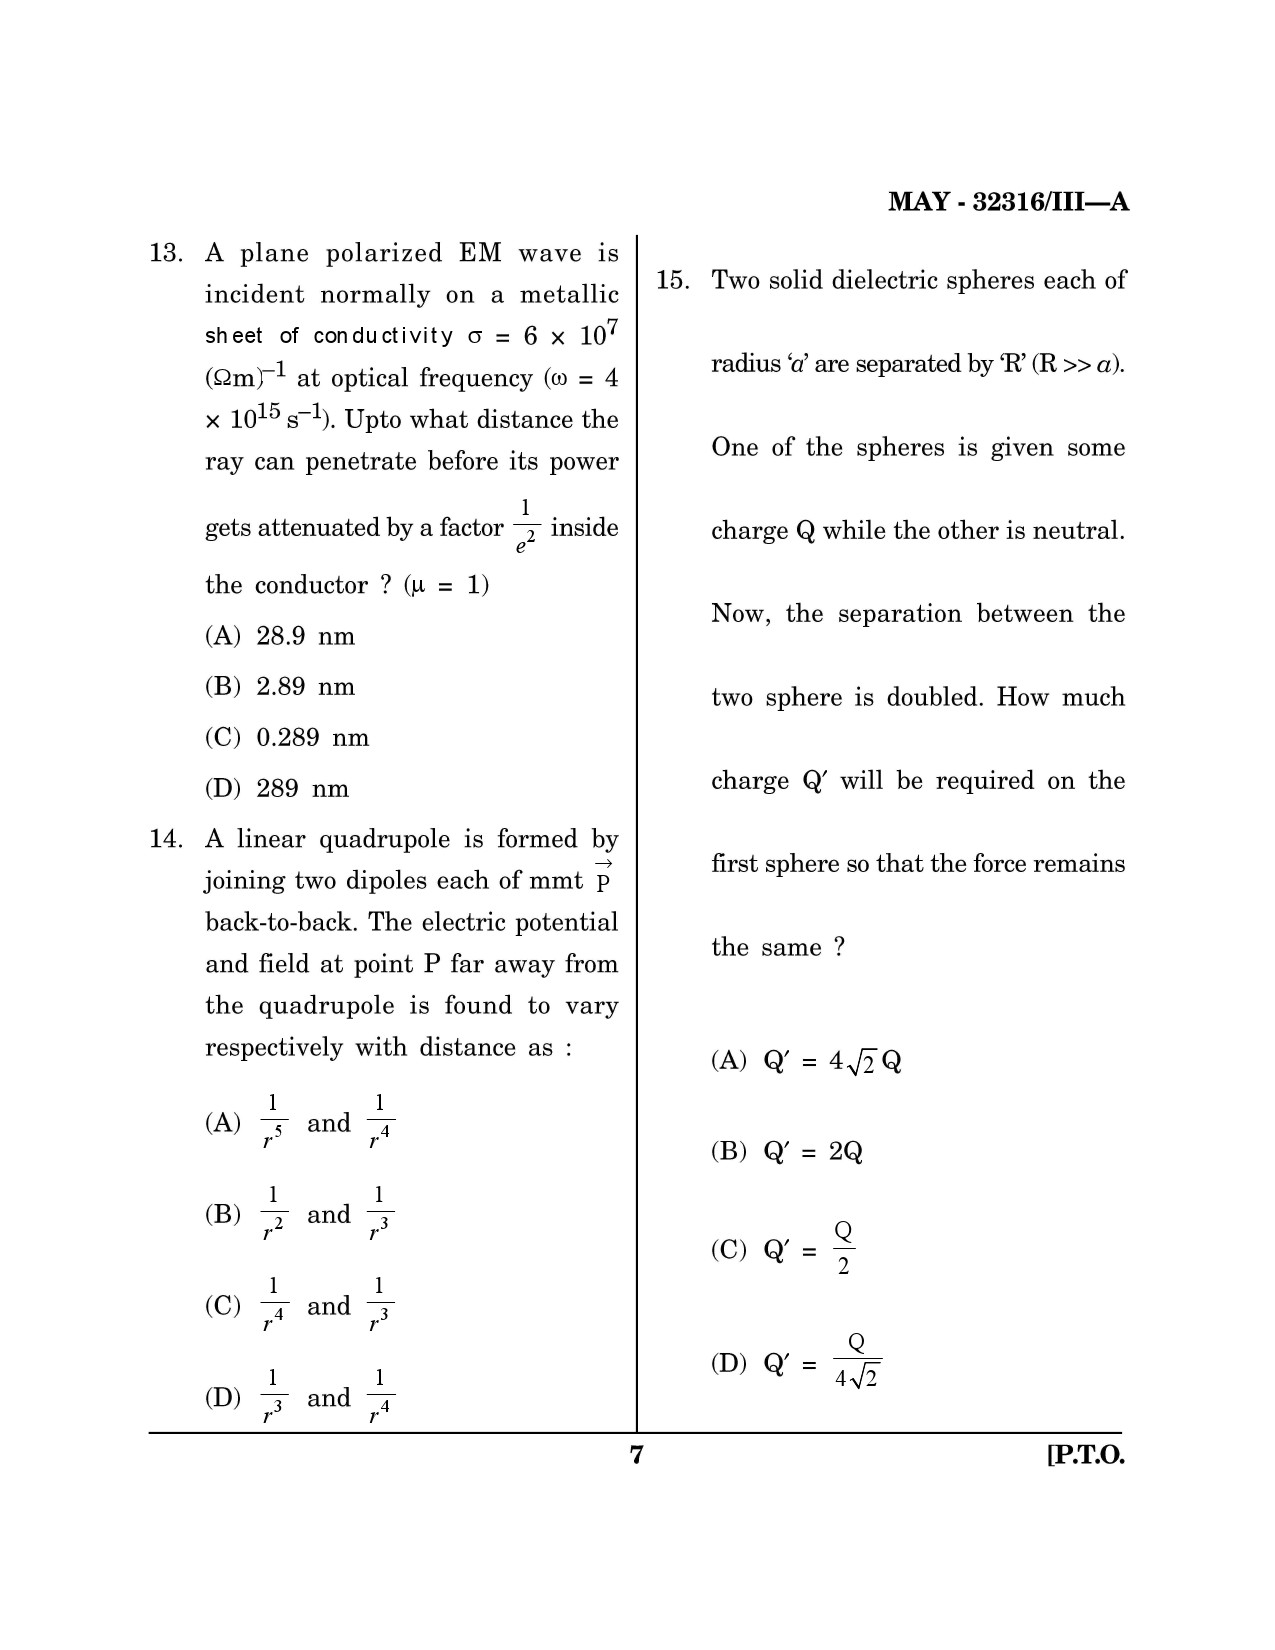 Maharashtra SET Physical Science Question Paper III May 2016 6